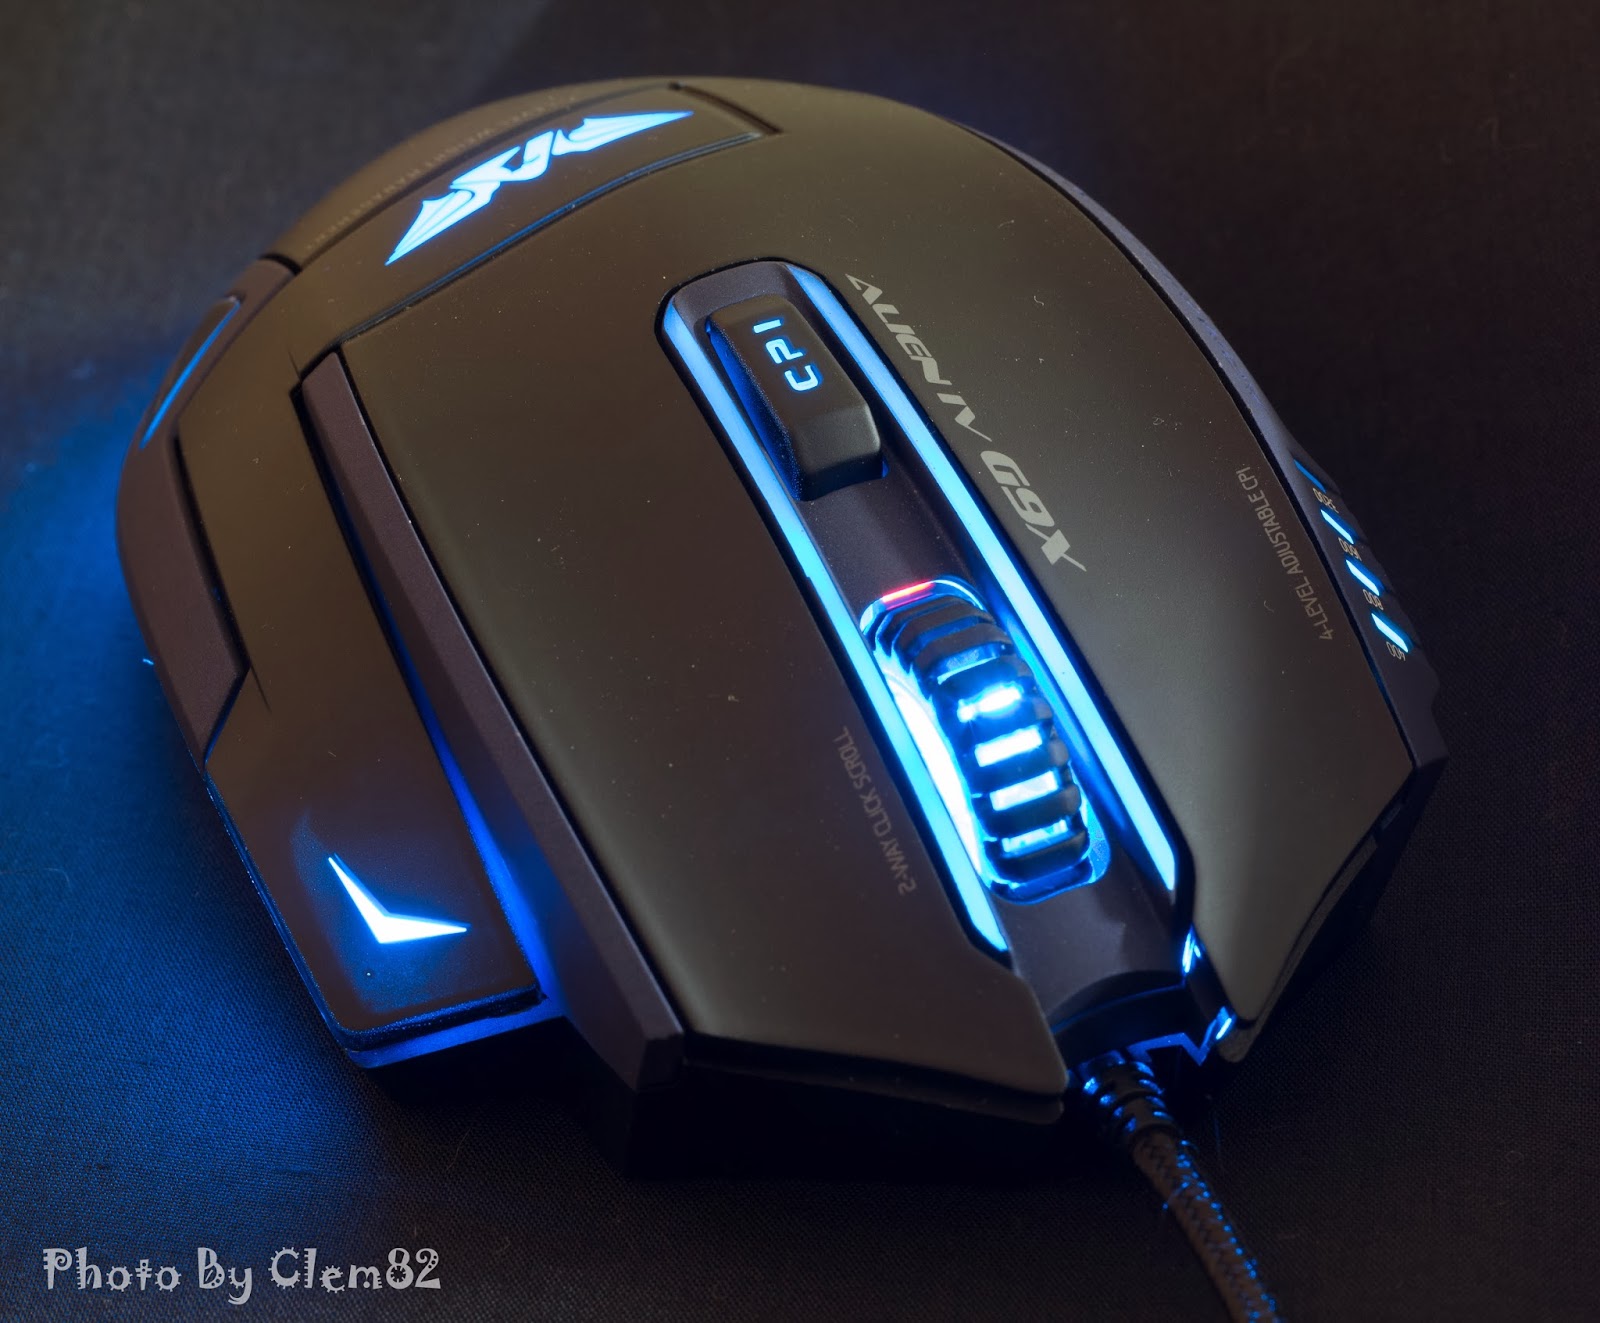 First Look & Review - Armaggeddon Alien IV G9X Optical Gaming Mouse 2